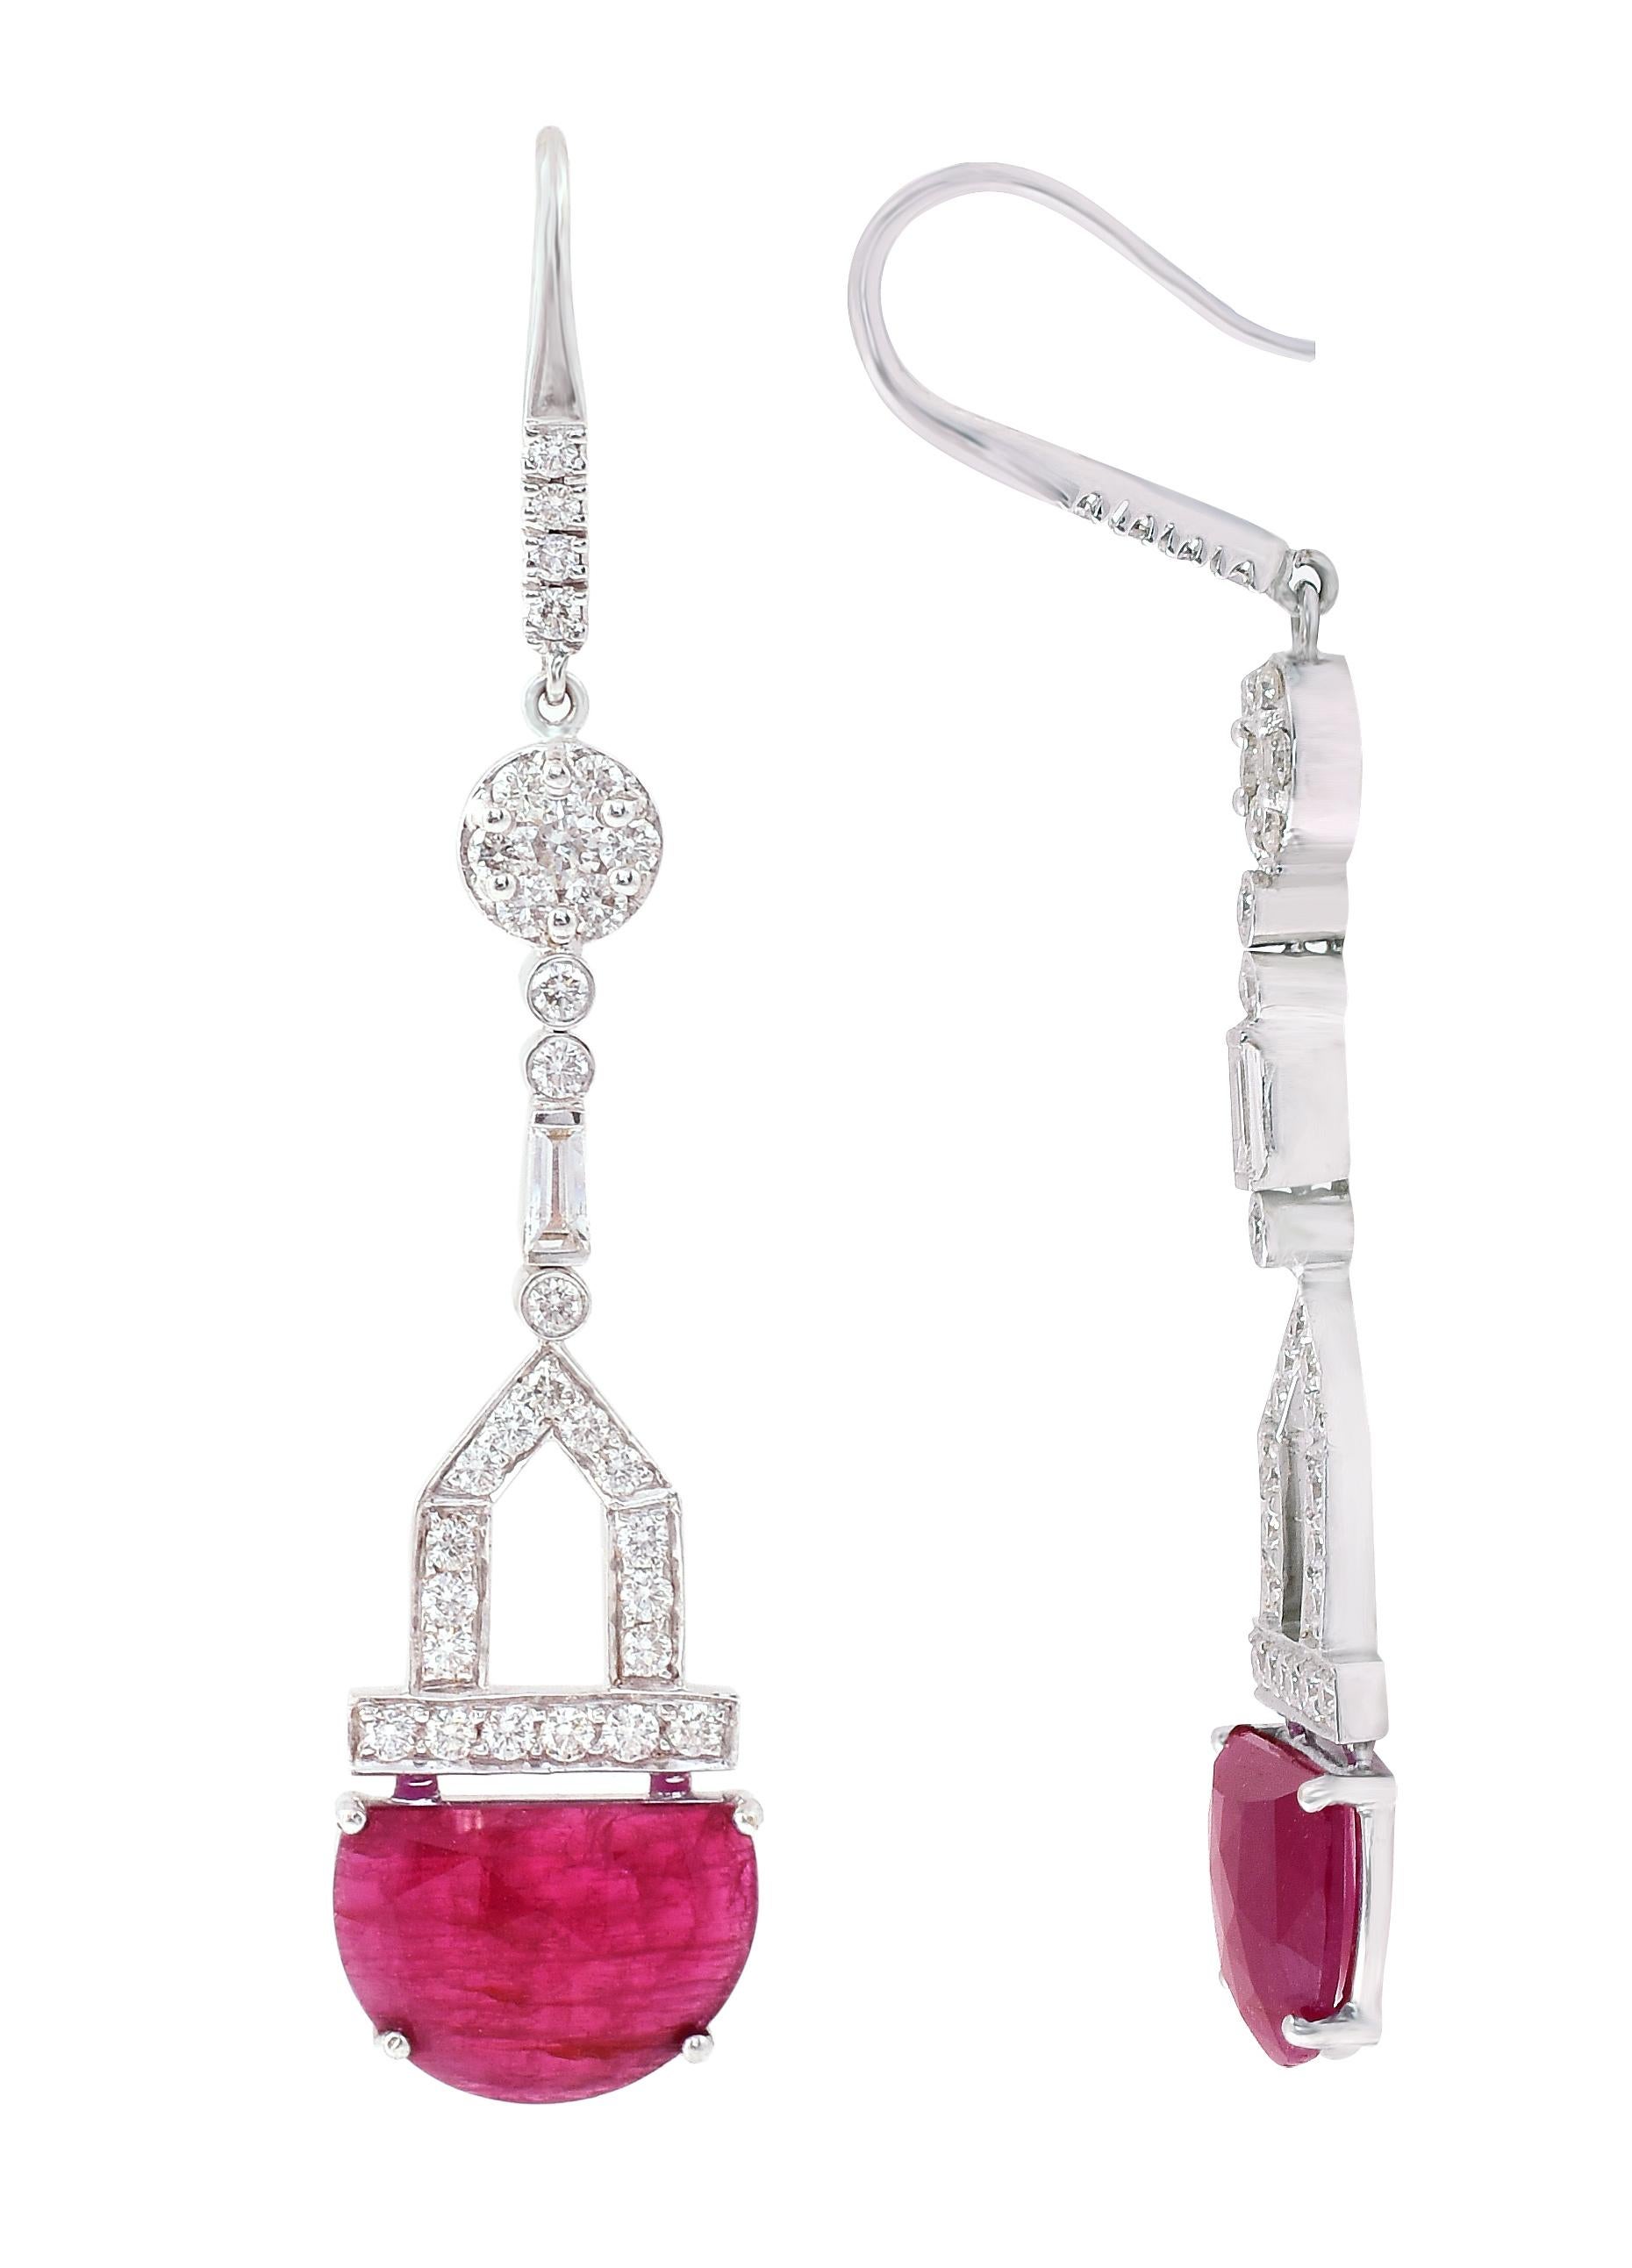 18 Karat White Gold 8.72 Carat Ruby and Diamond Unique-Cut Drop Earrings

This glorious crimson red ruby and diamond long slice hanging earring is exquisite. The solitaire fancy d-shaped faceted slice ruby gives depth and dramatic feel to the